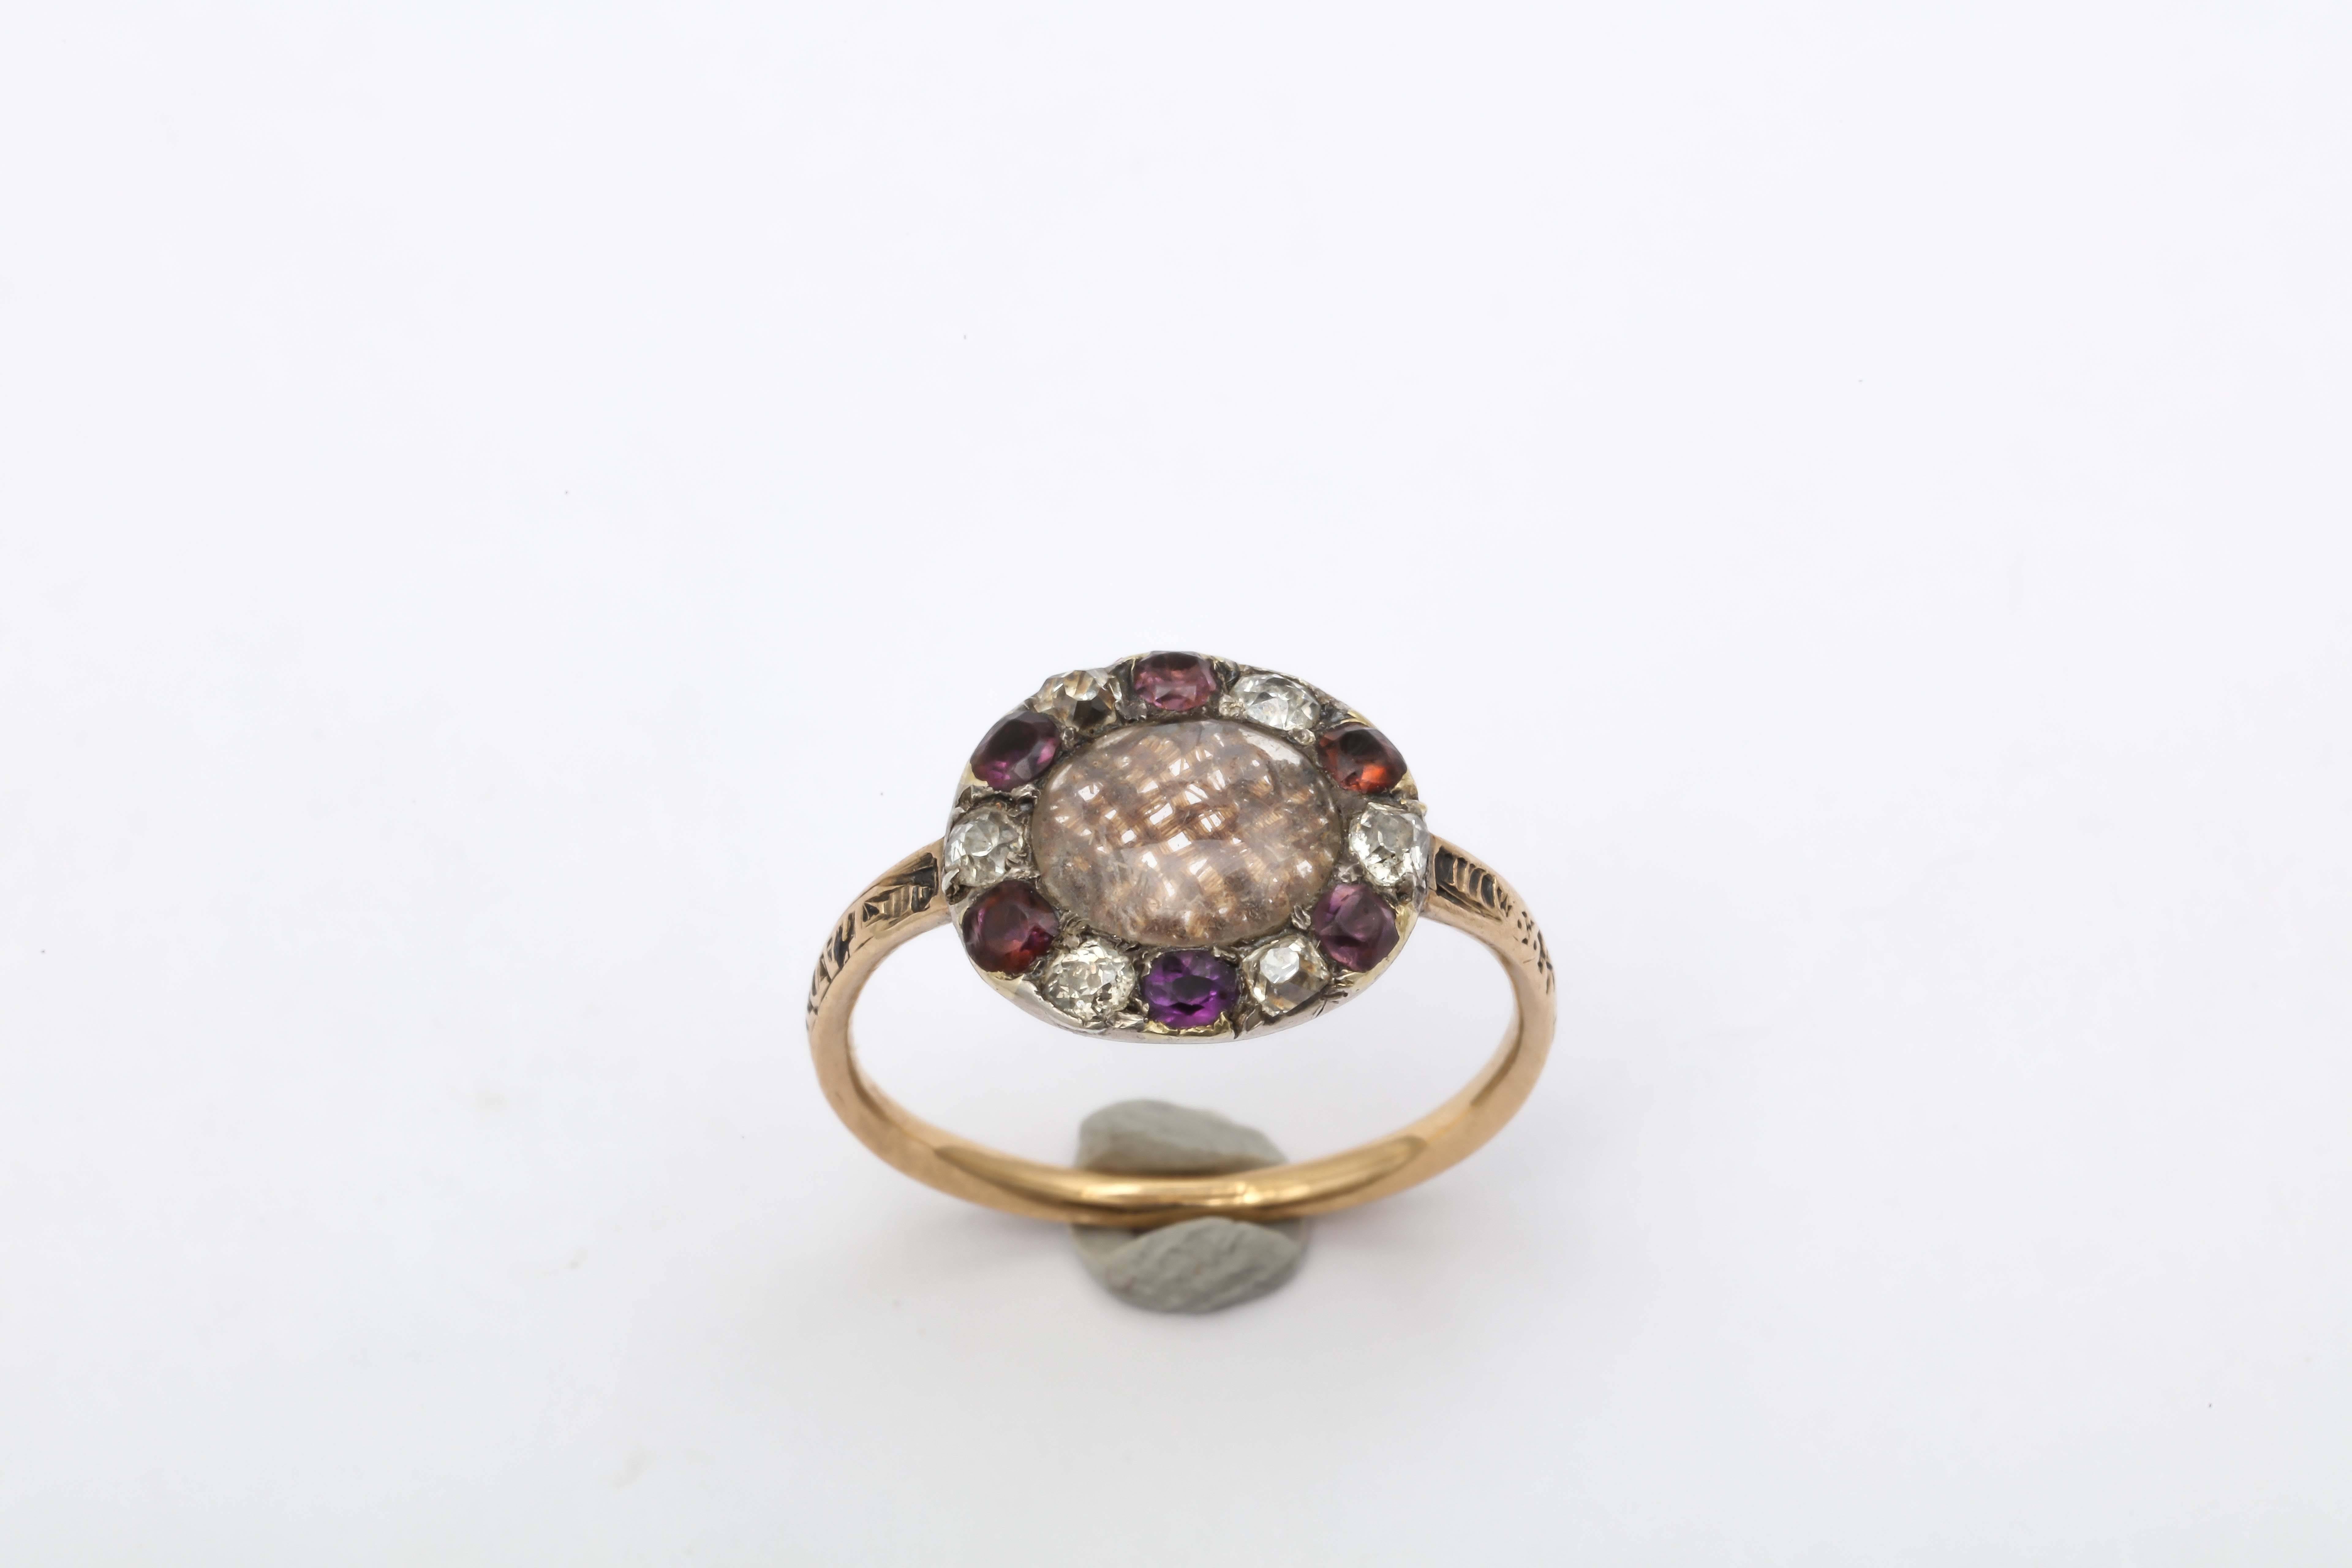 Stunning Georgian ring with a central crystal locket of woven hair surrounded by amethysts and diamonds. Amethysts have long been used as the symbol of royalty-purple being their color- and a symbol of piety for the church. The shank has worn